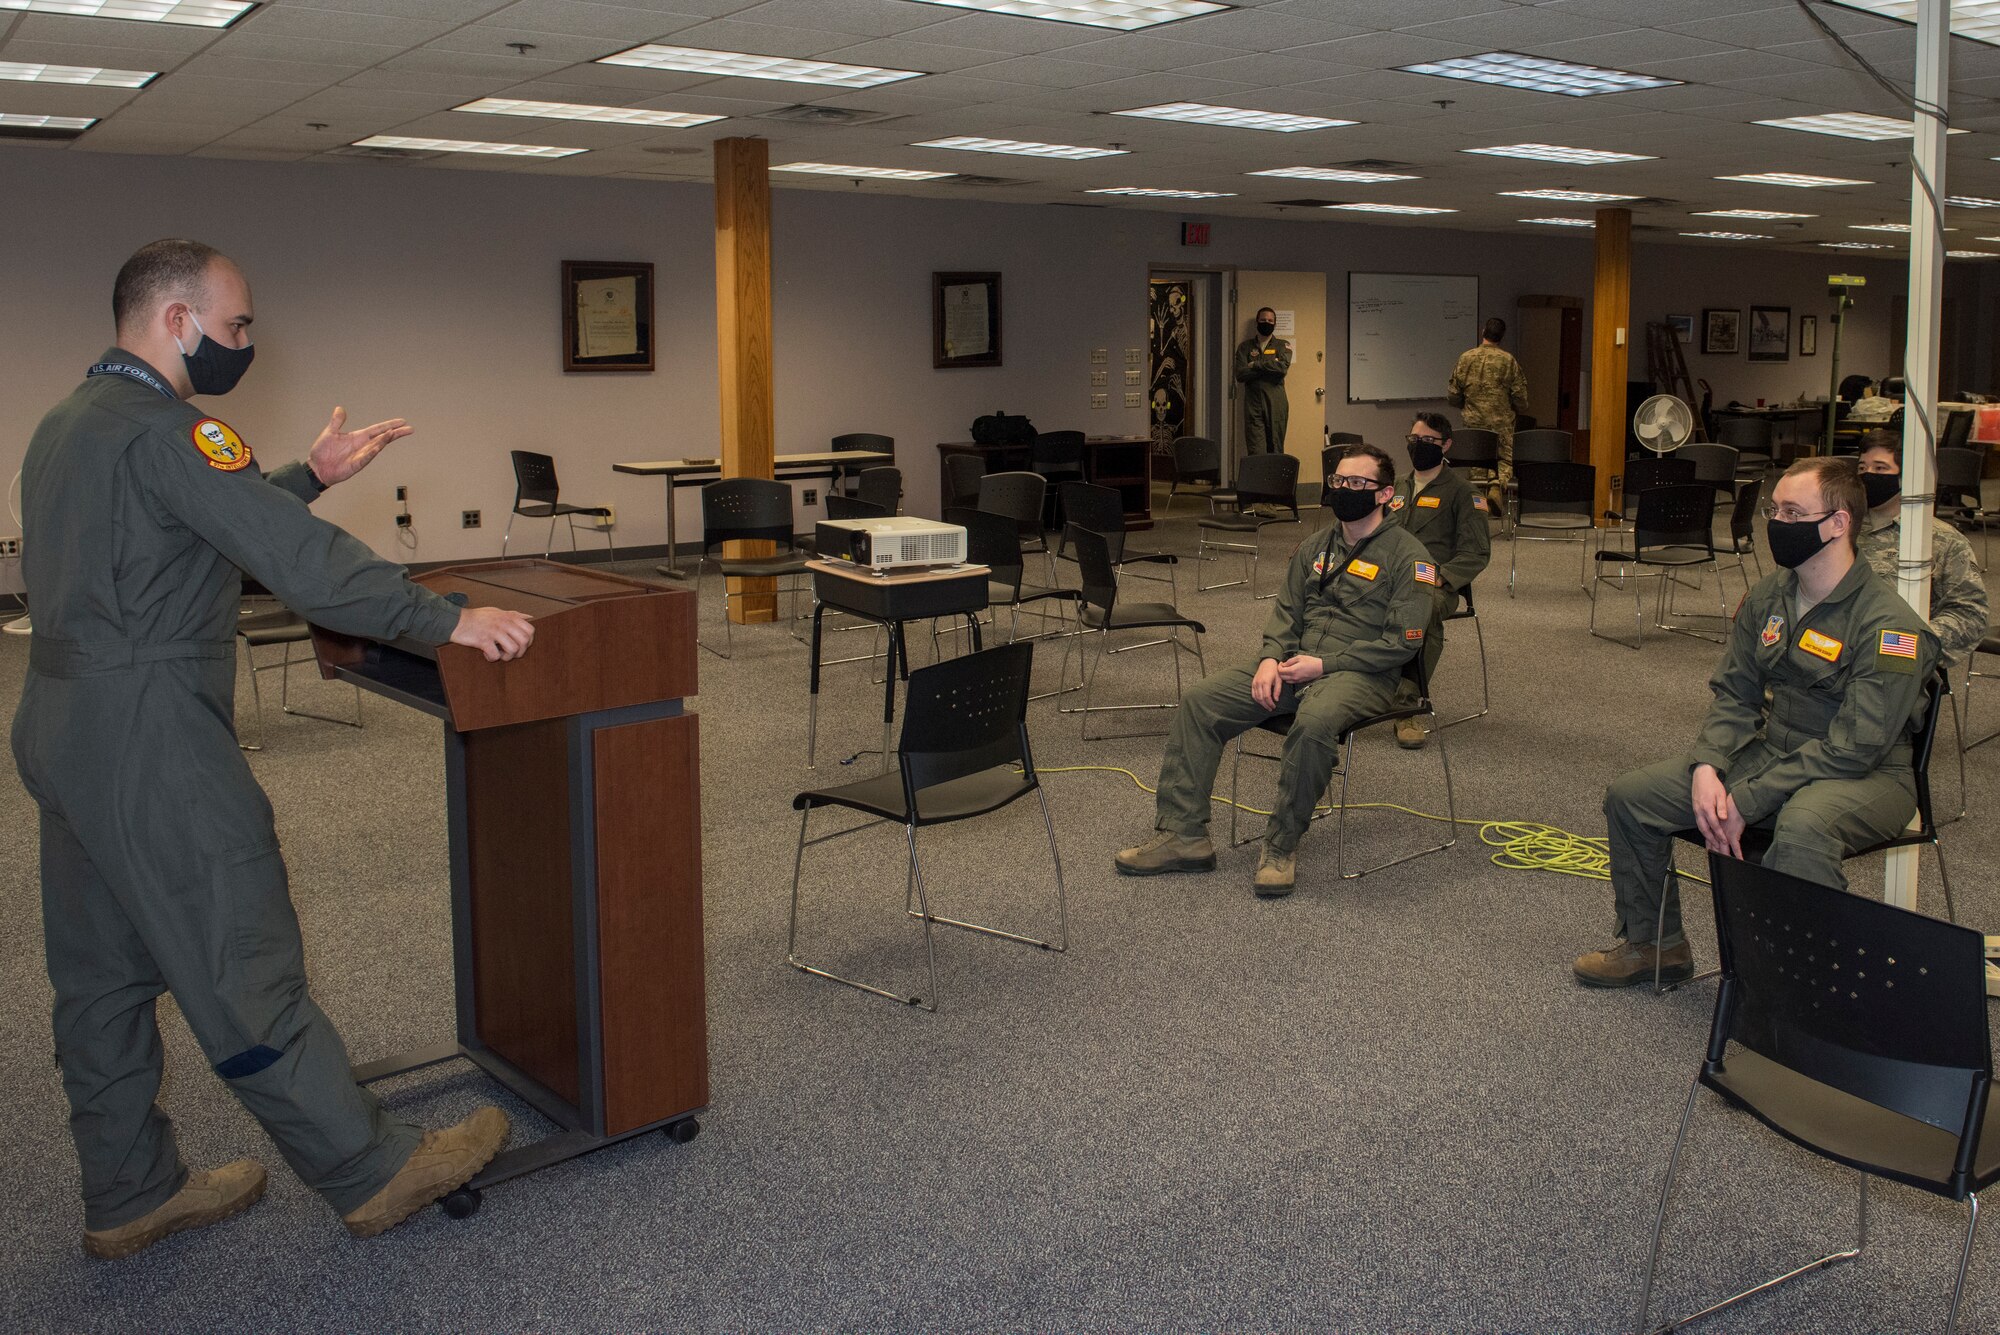 A service member briefs four service members while the group practices social distancing and wears cloth masks